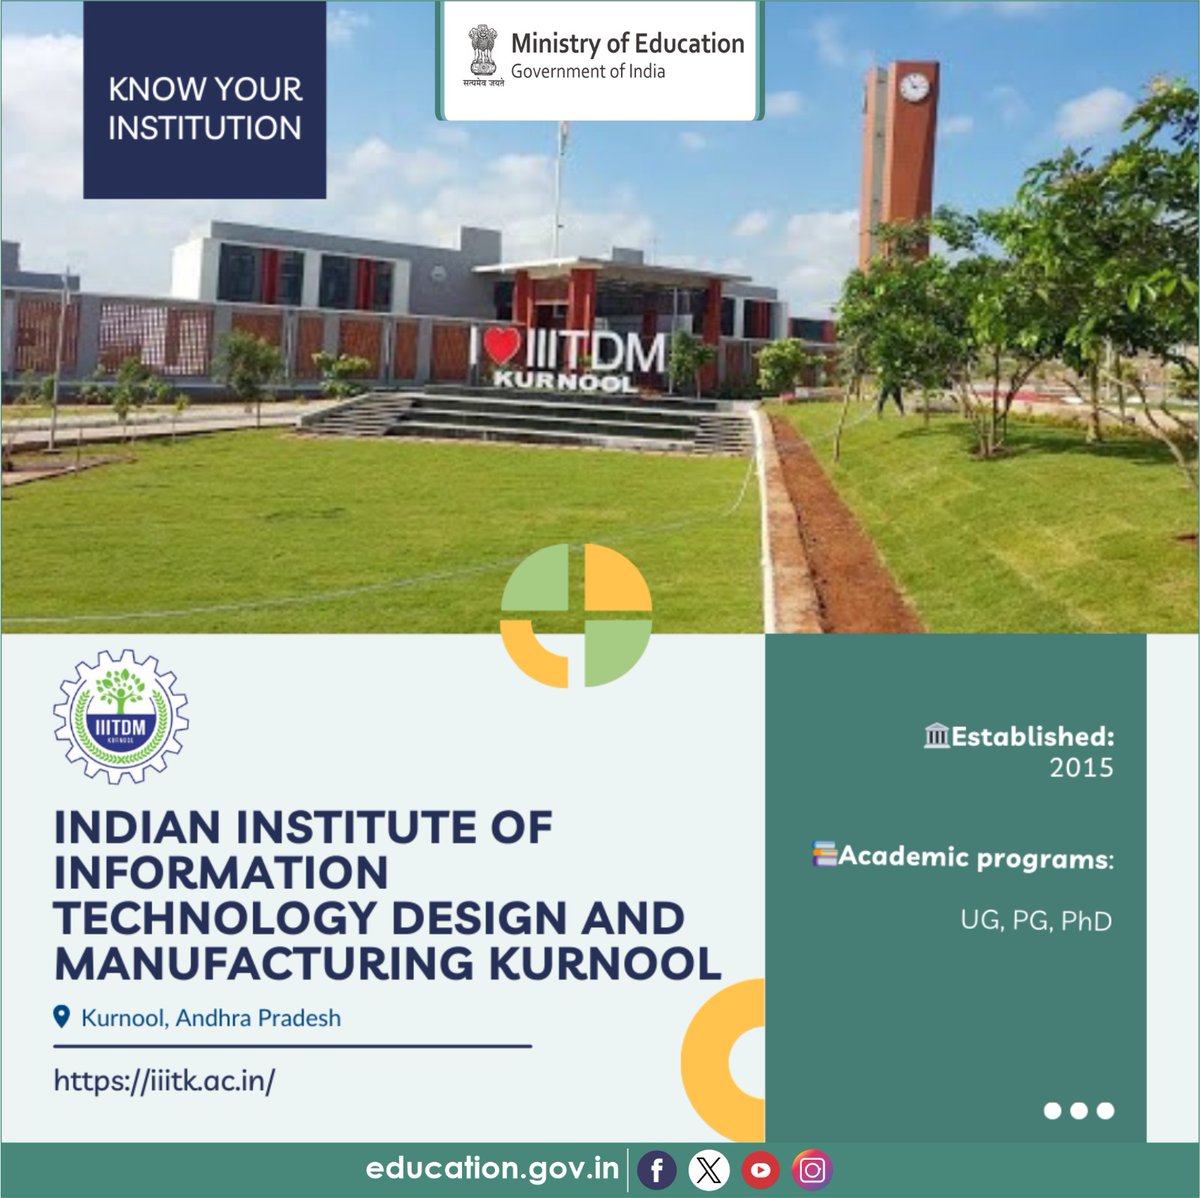 Know about the HEIs of India! Indian Institute of Information Technology Design and Manufacturing Kurnool (IIITDM Kurnool), established in 2015, is a leading centre in IT-enabled design and manufacturing. The campus, located on 151.51 acres at Jagannathagattu, Kurnool, Andhra